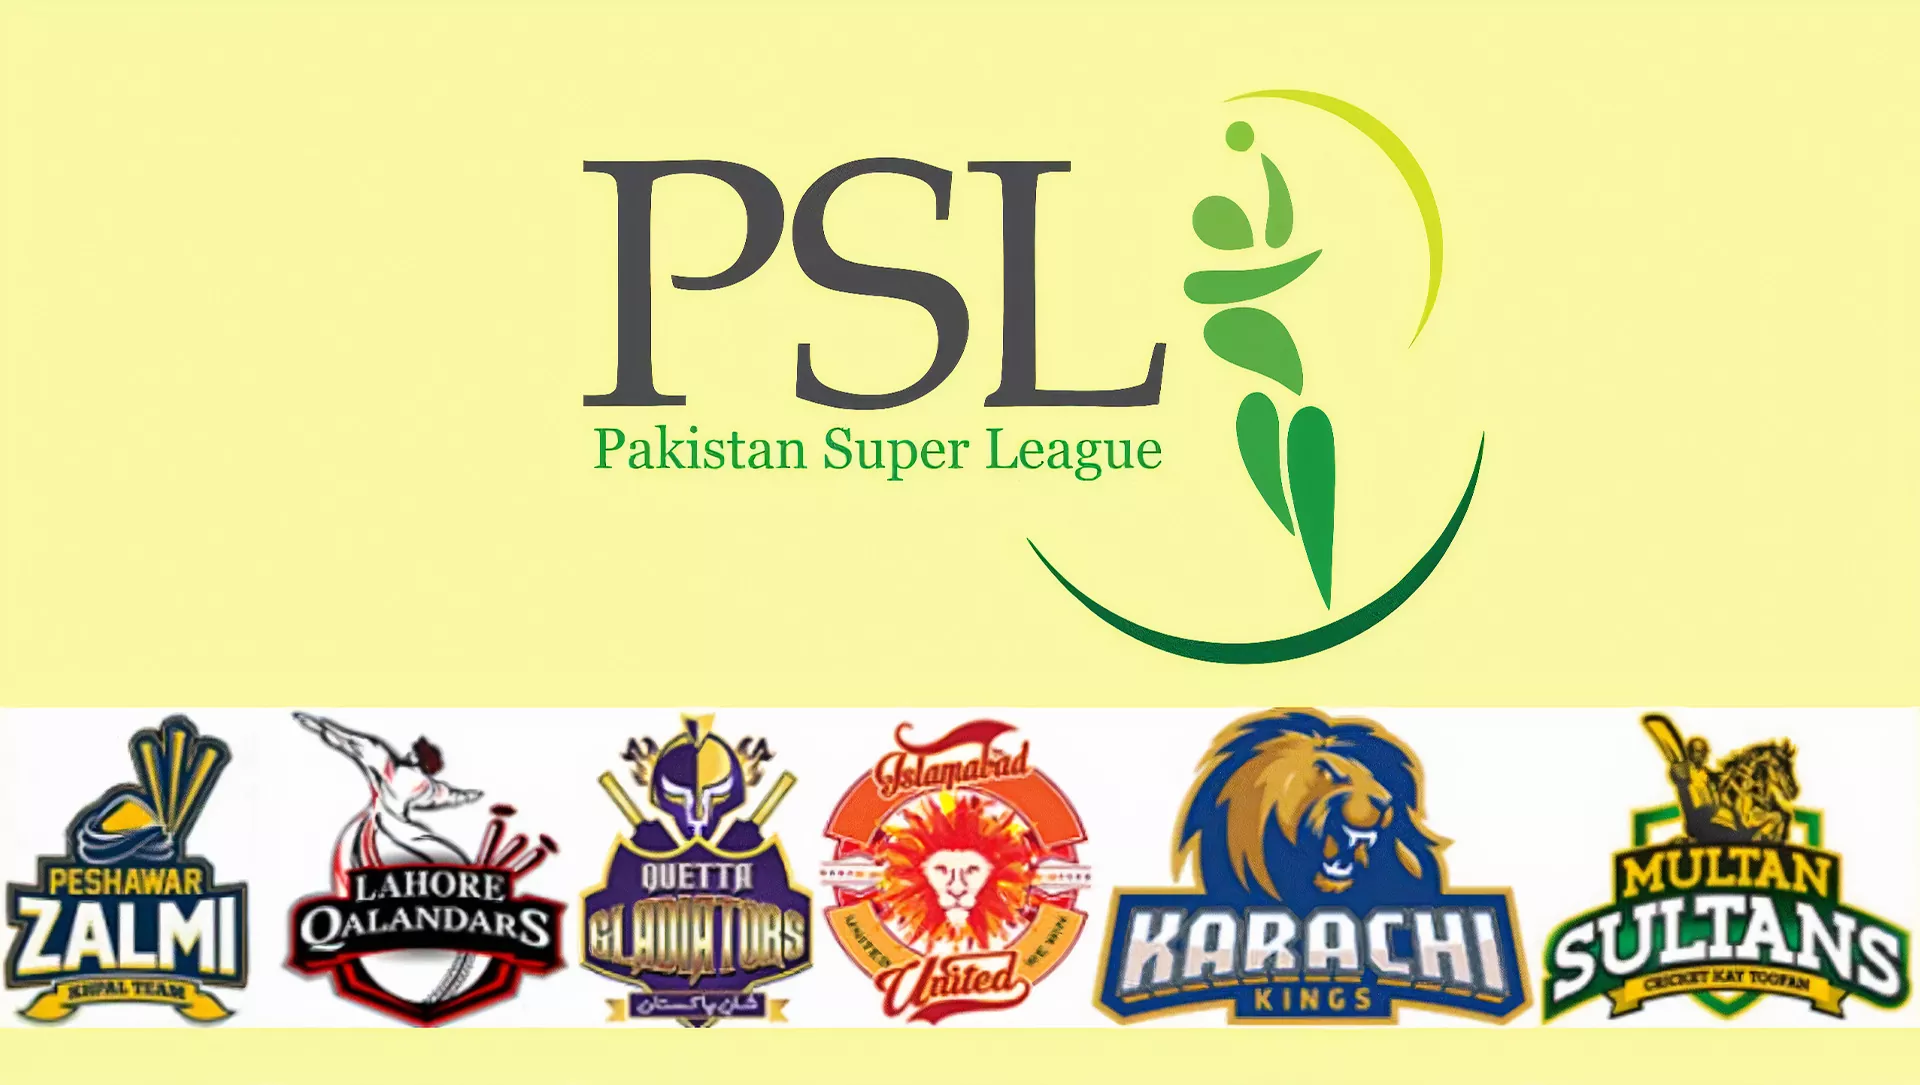 You can place bets on Pakistan Super League (PSL) after registering on the site